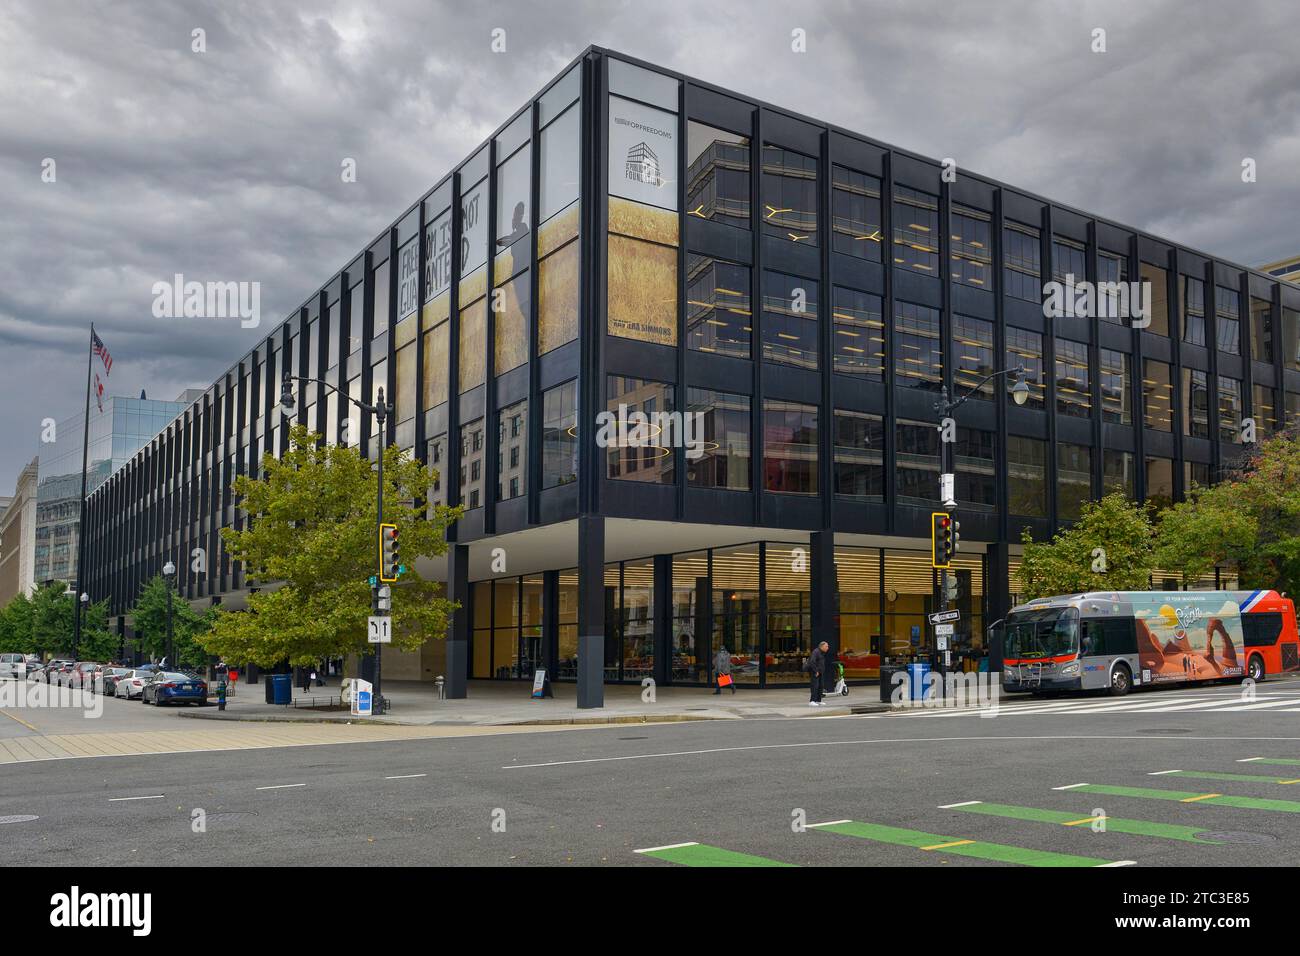 The Martin Luther King Jr. Memorial Library building on G St NW in Washington DC Stock Photo